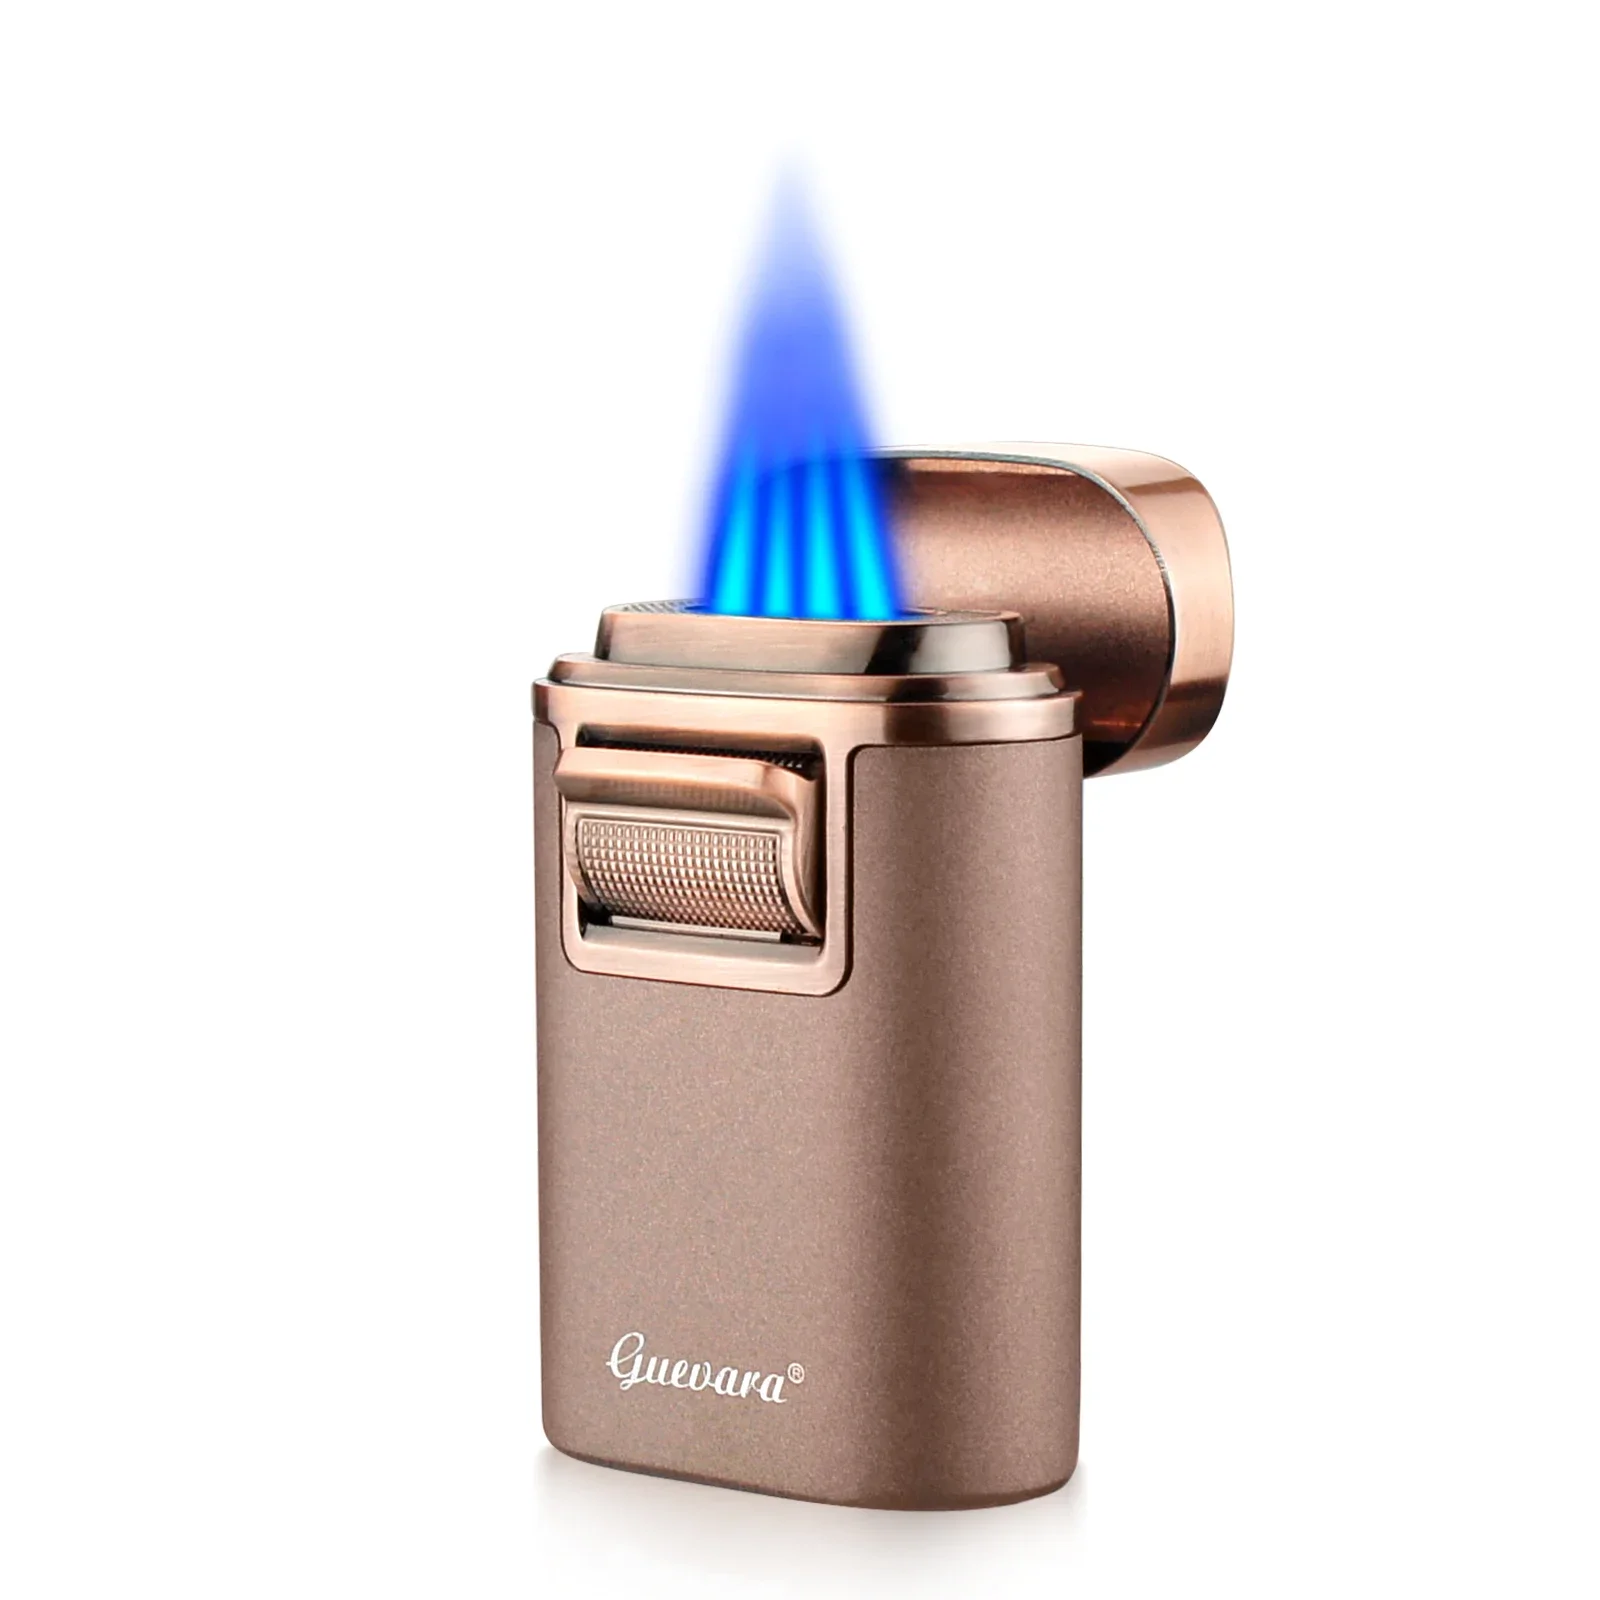 

Guevara Metal Cigar Cigarette Tobacco Lighter Torch 3 Jet Flame Refillable With Punch Smoking Tool Accessories Portable Gift Box